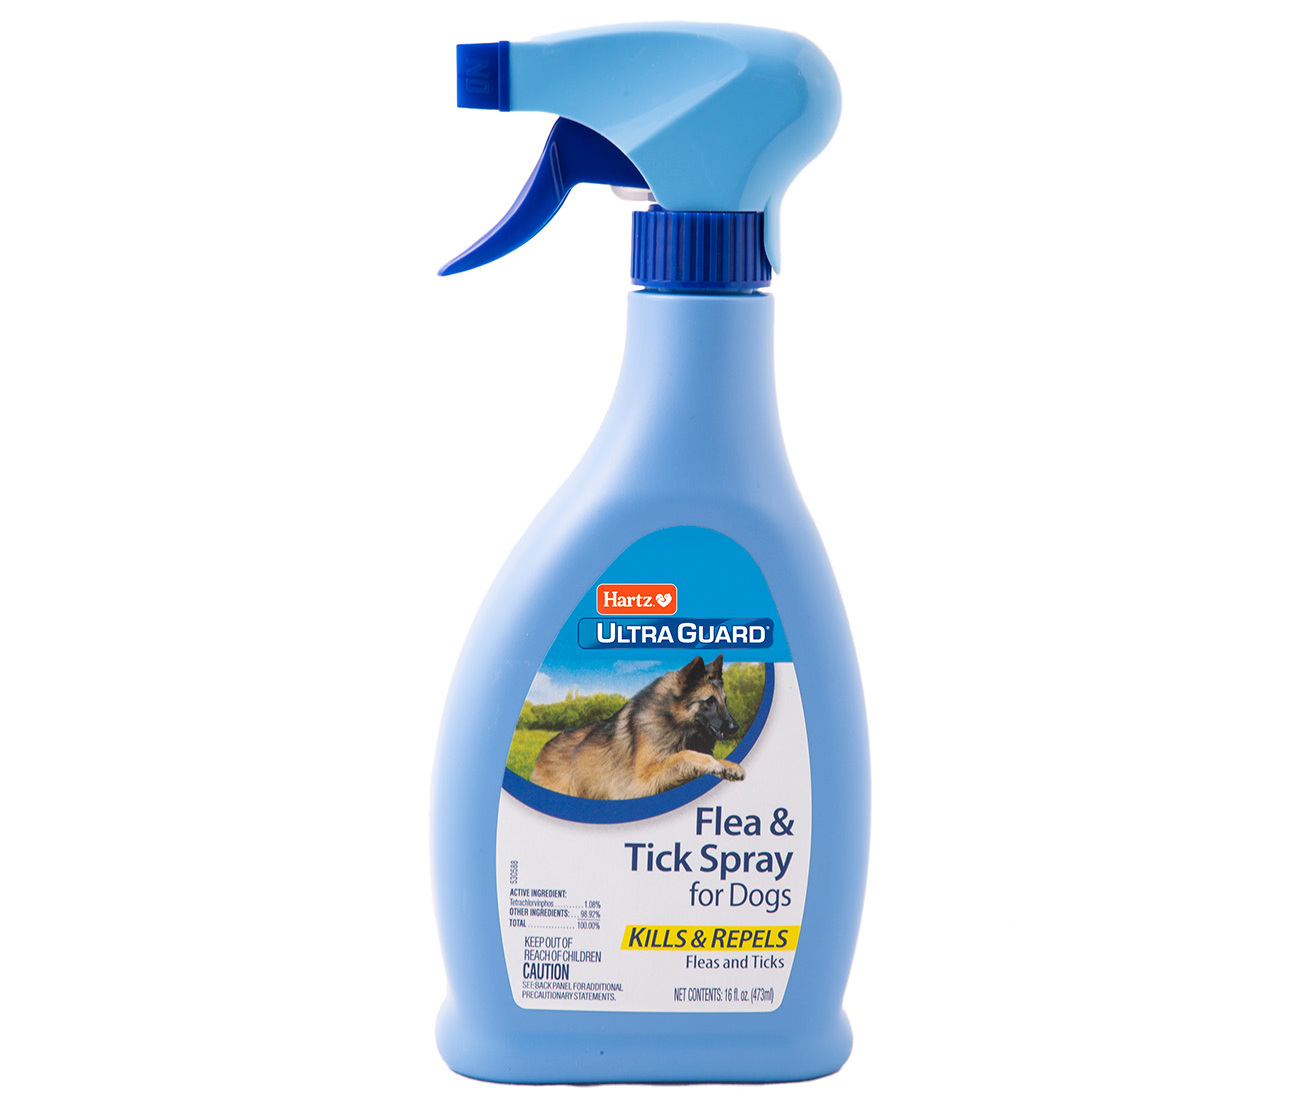 How To Use Hartz Flea And Tick Spray For Dogs